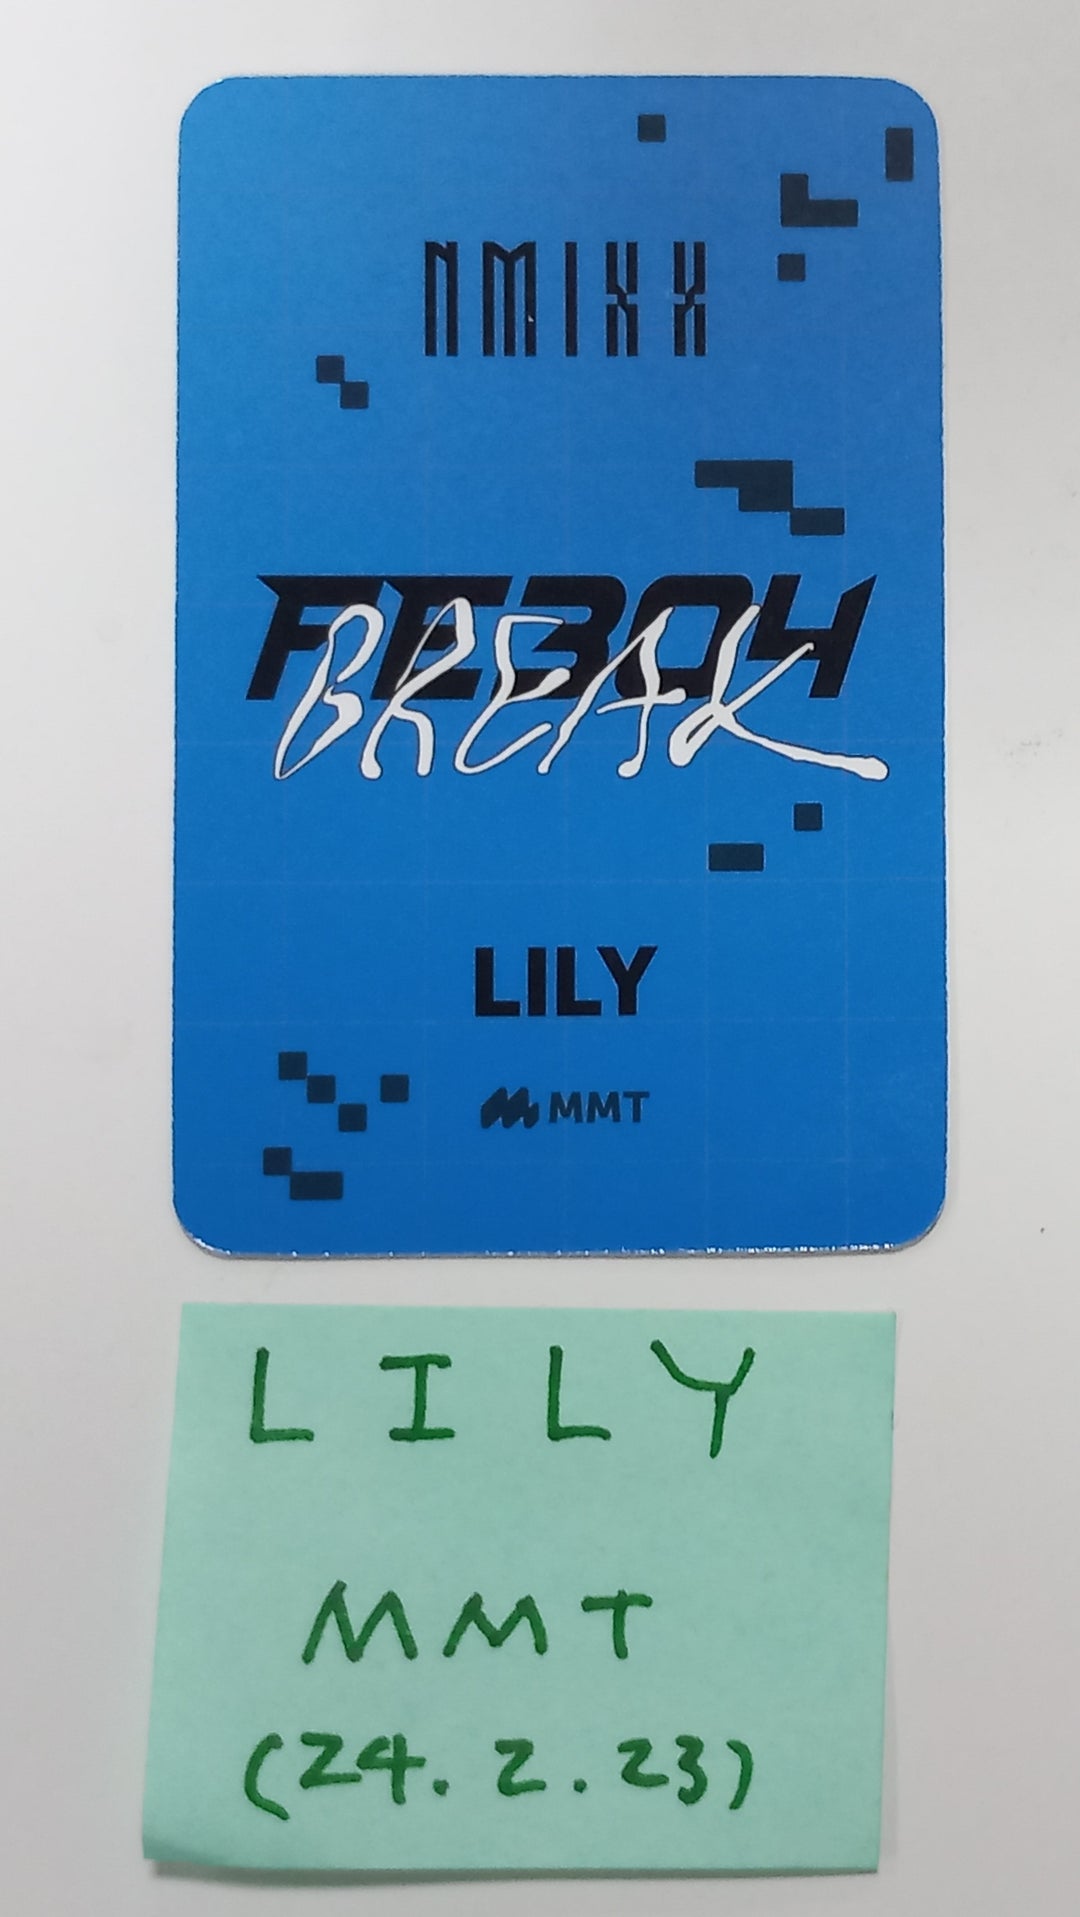 Lily (Of NMIXX) "Fe3O4: BREAK" - Hand Autographed(Signed) Photocard [24.2.23]